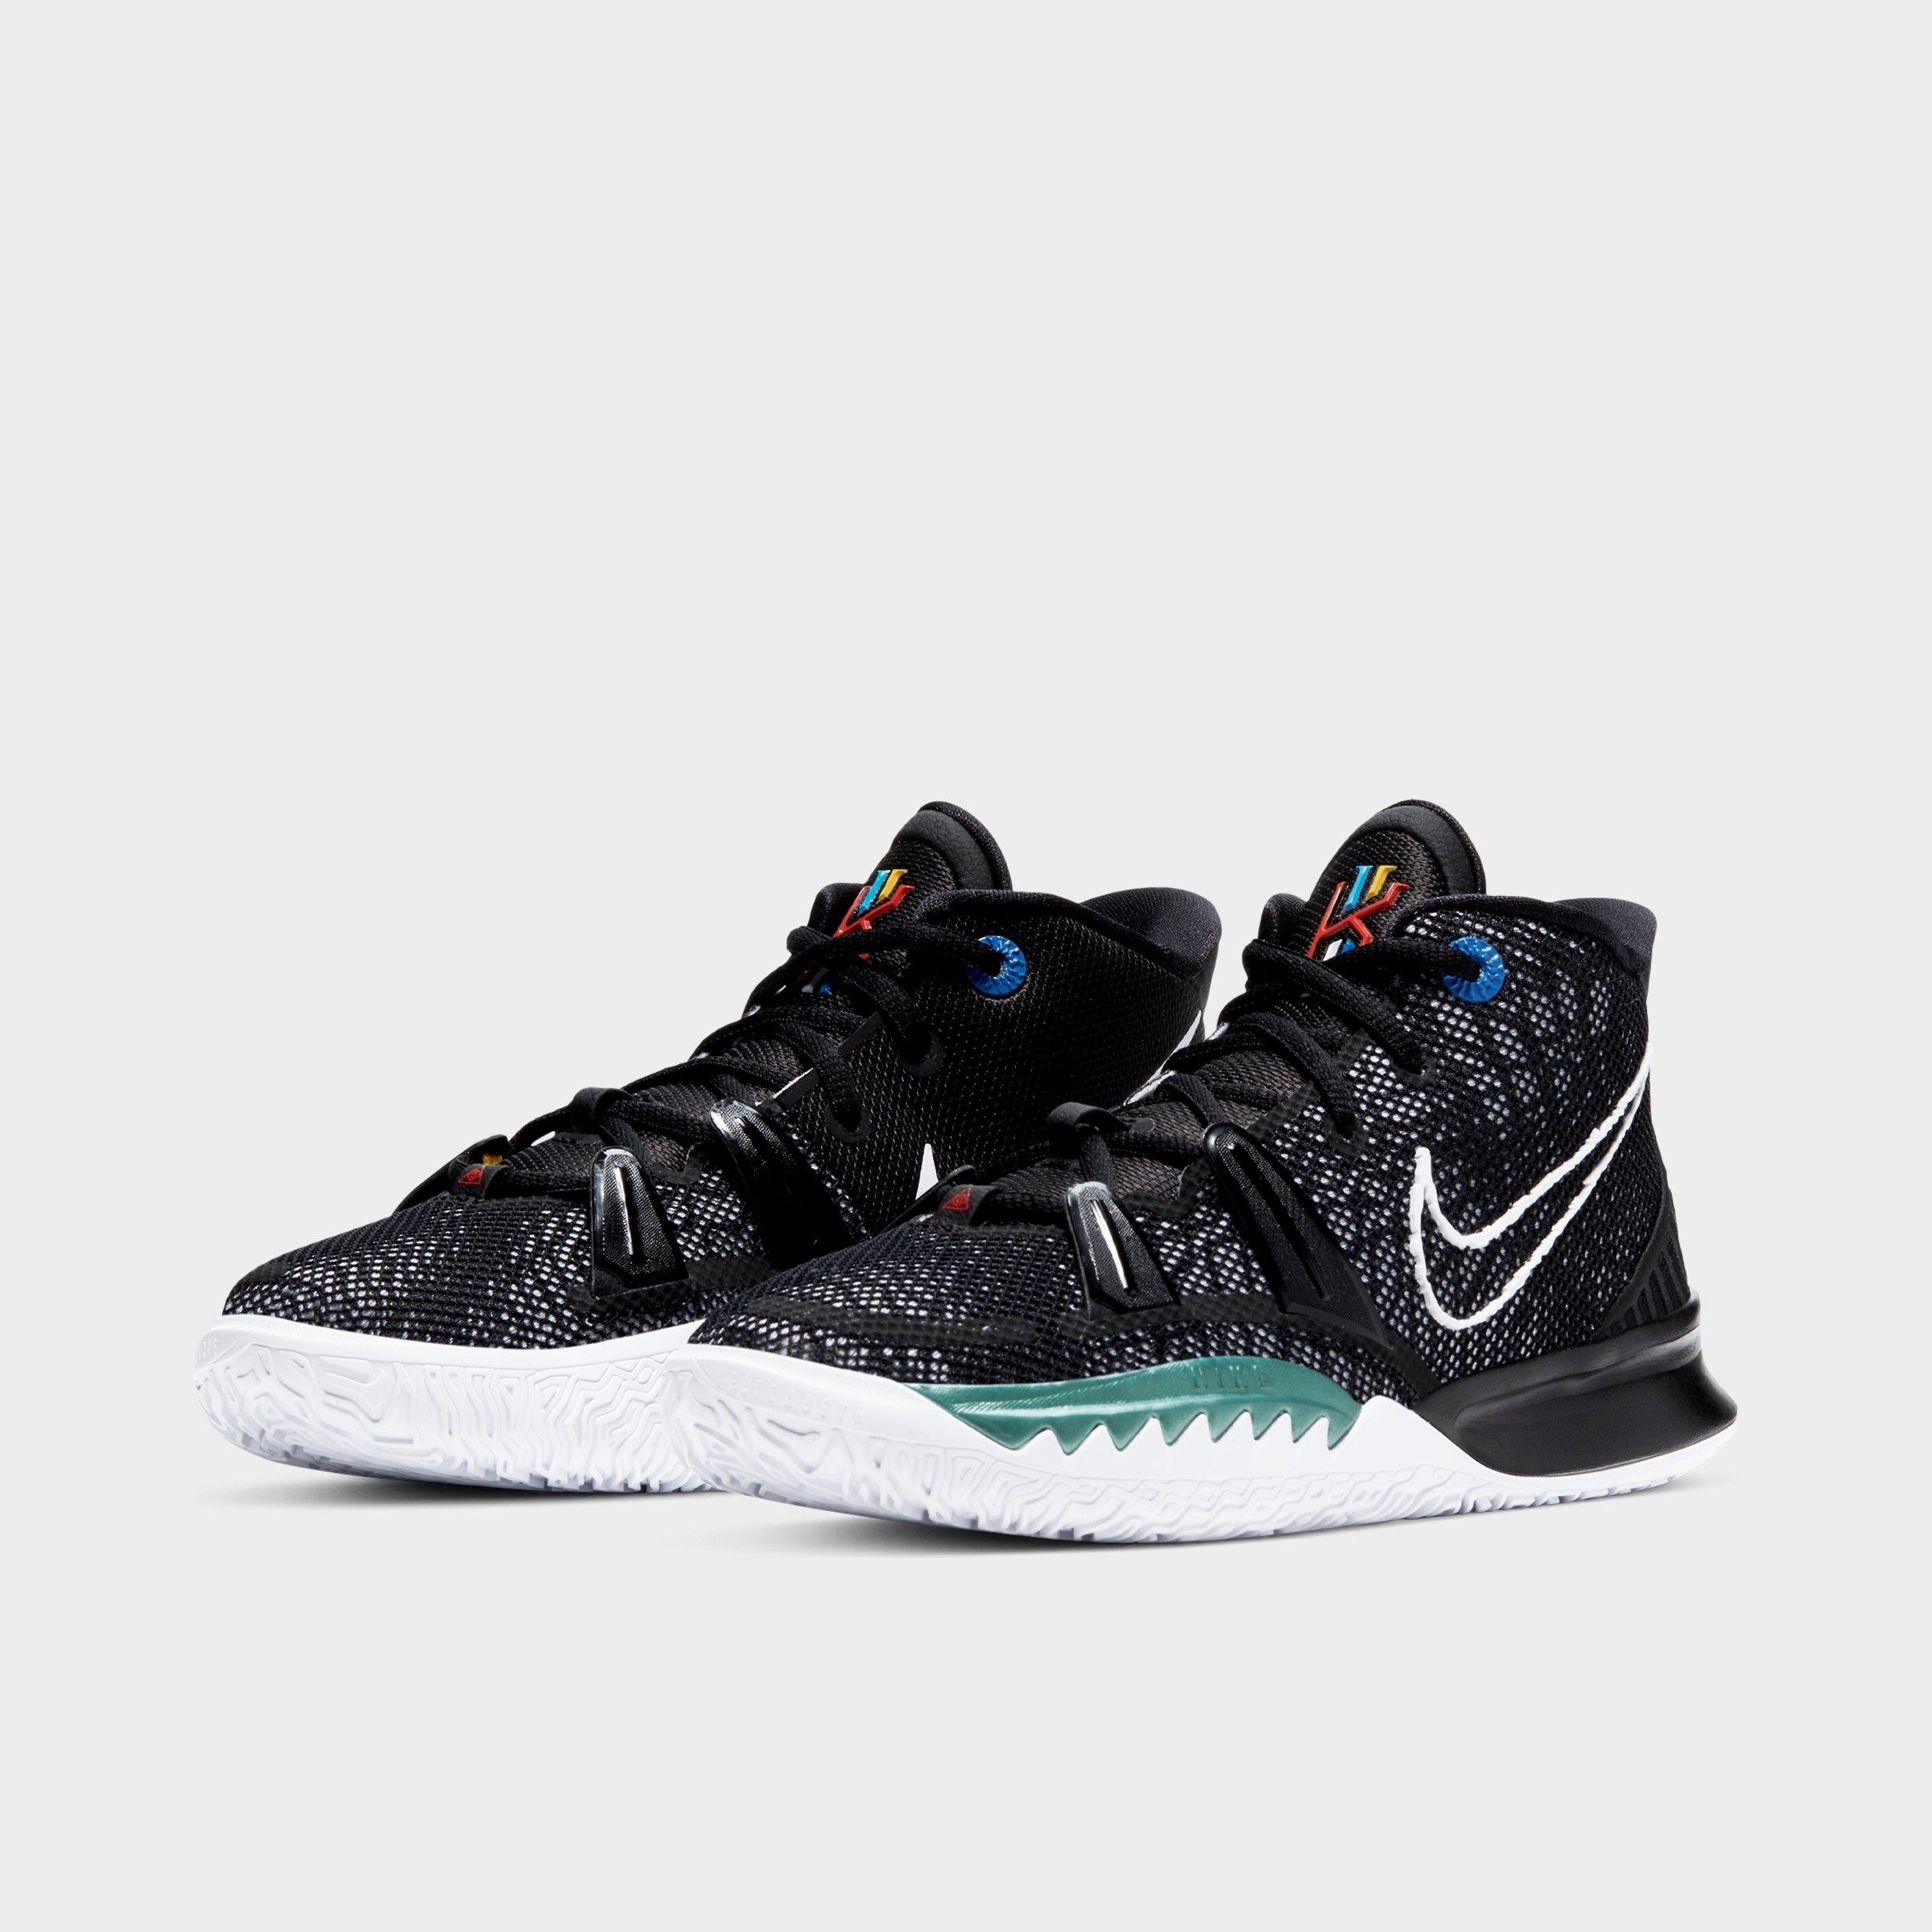 kyrie 7 shoes